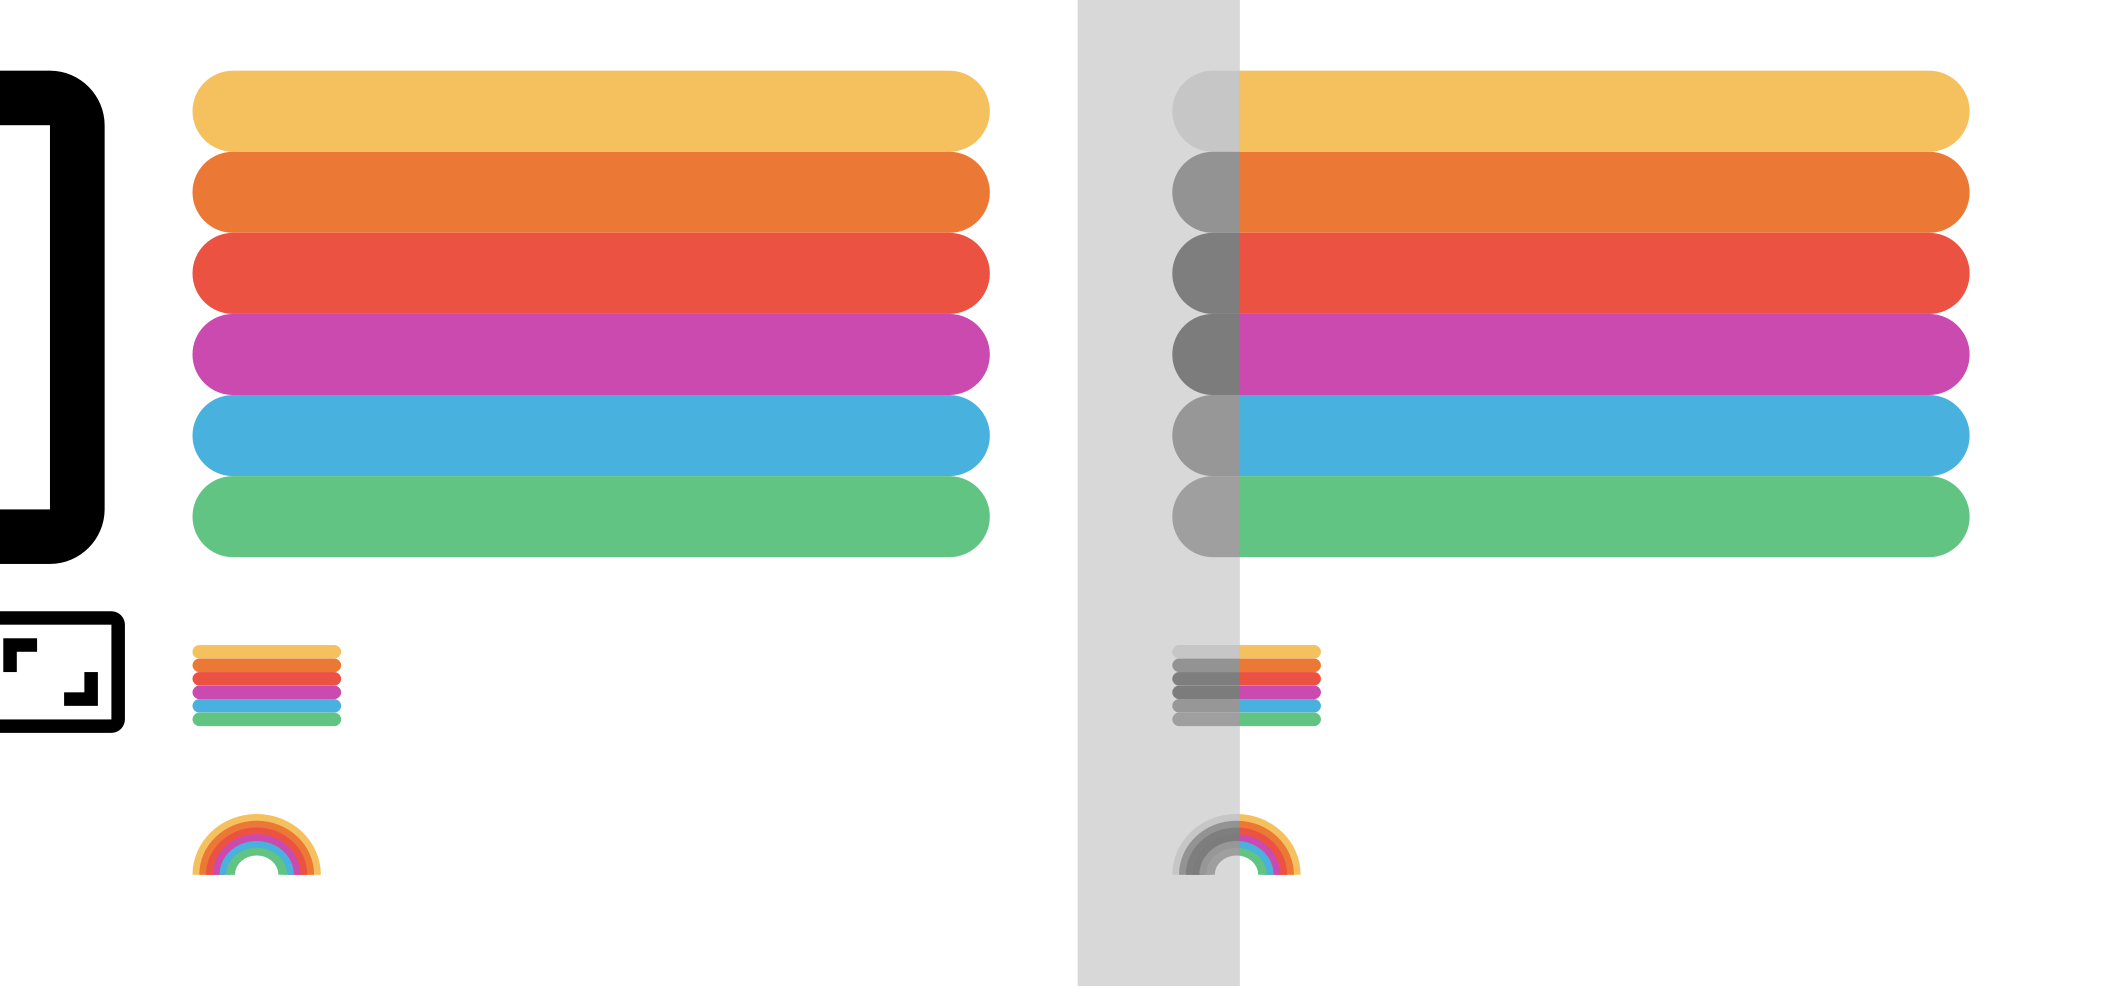 Mockups for our Pride icon